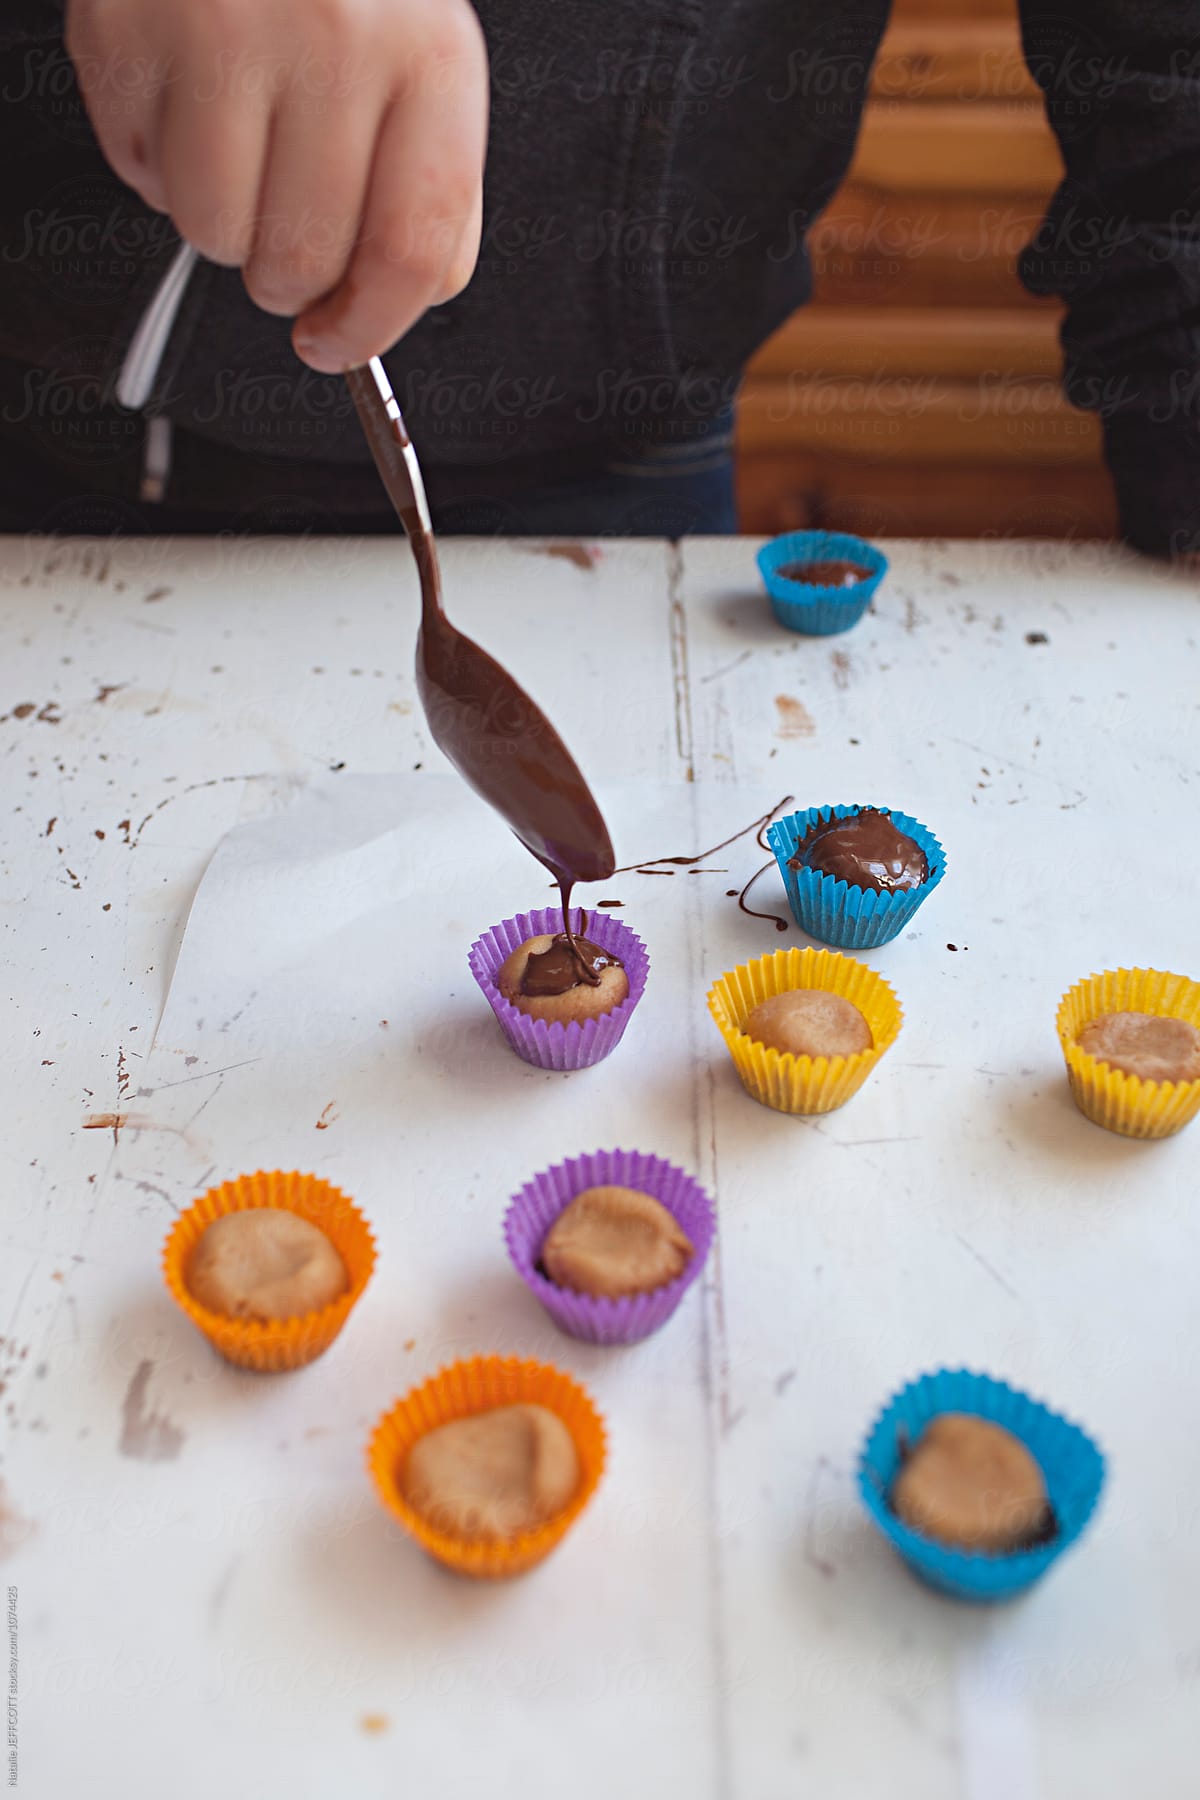 Making peanut butter cups with a child